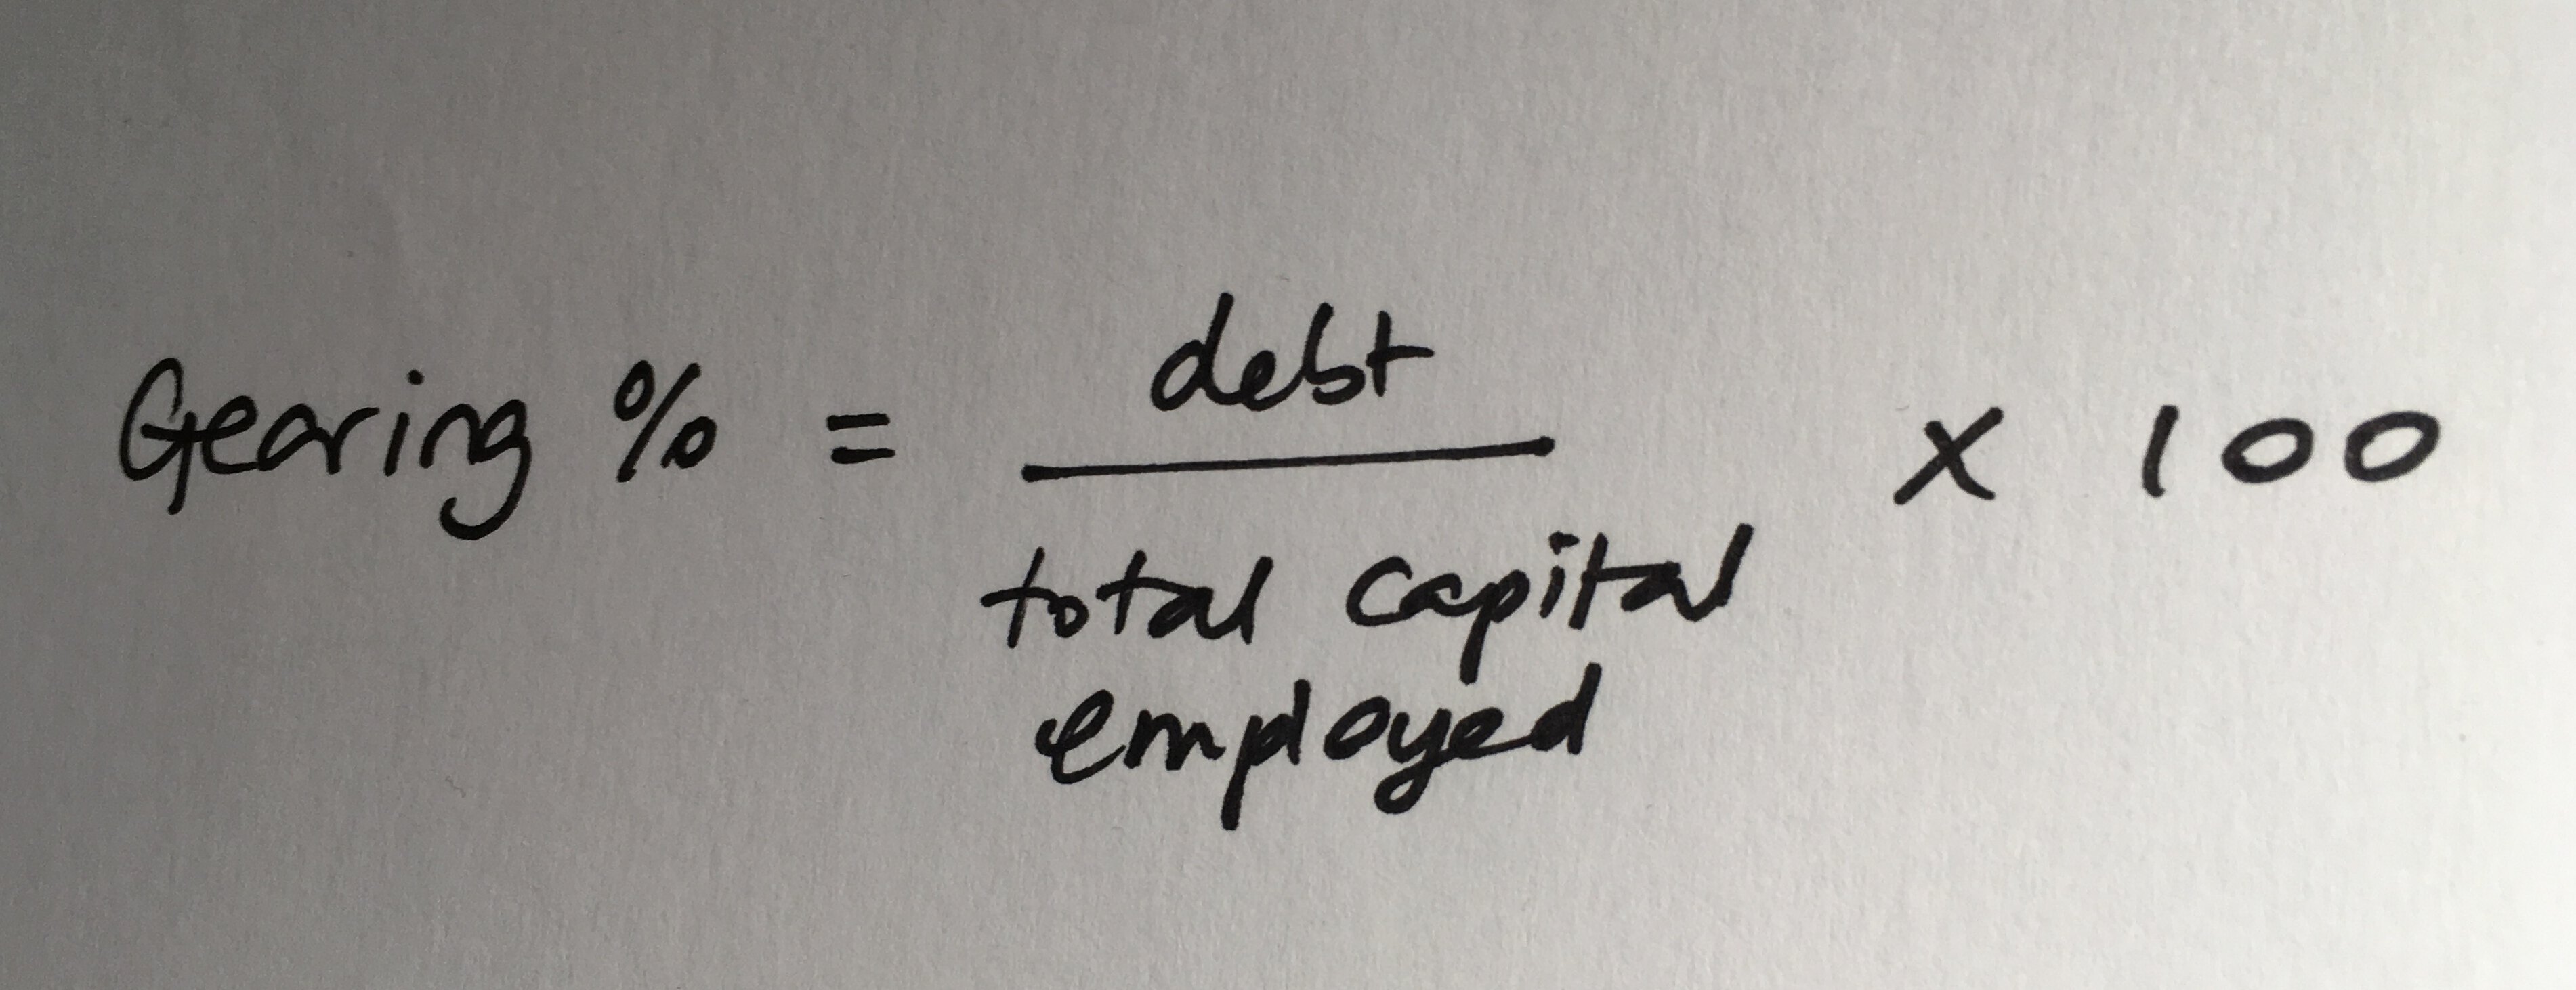 Gearing % = debt/total capital employed x 100